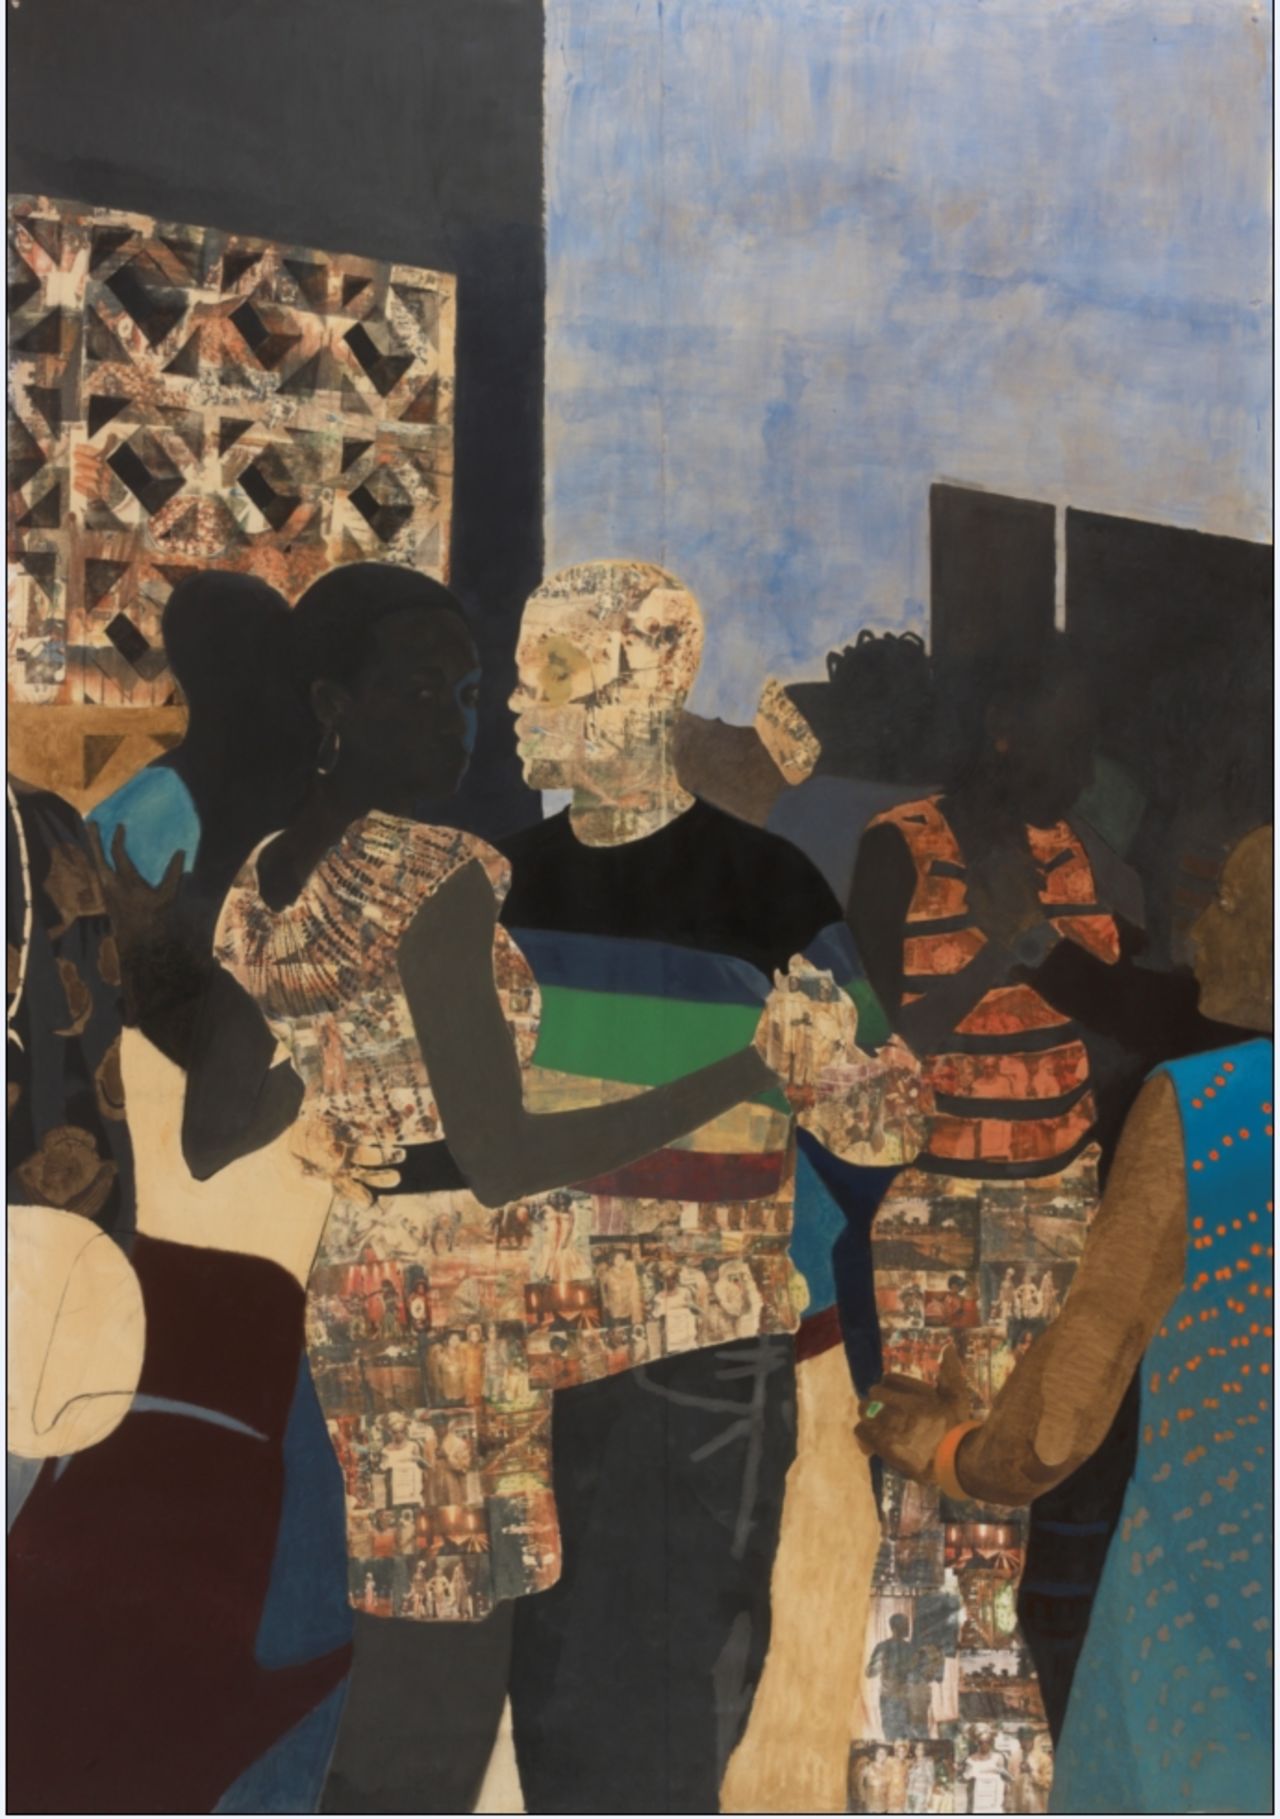 "This was the first multiple figure piece I did," said Akunyili. "I had done so many two person compositions at this point that I wanted to challenge myself to figure out how to orchestrate a rectangle when there are multiple bodies to consider. 